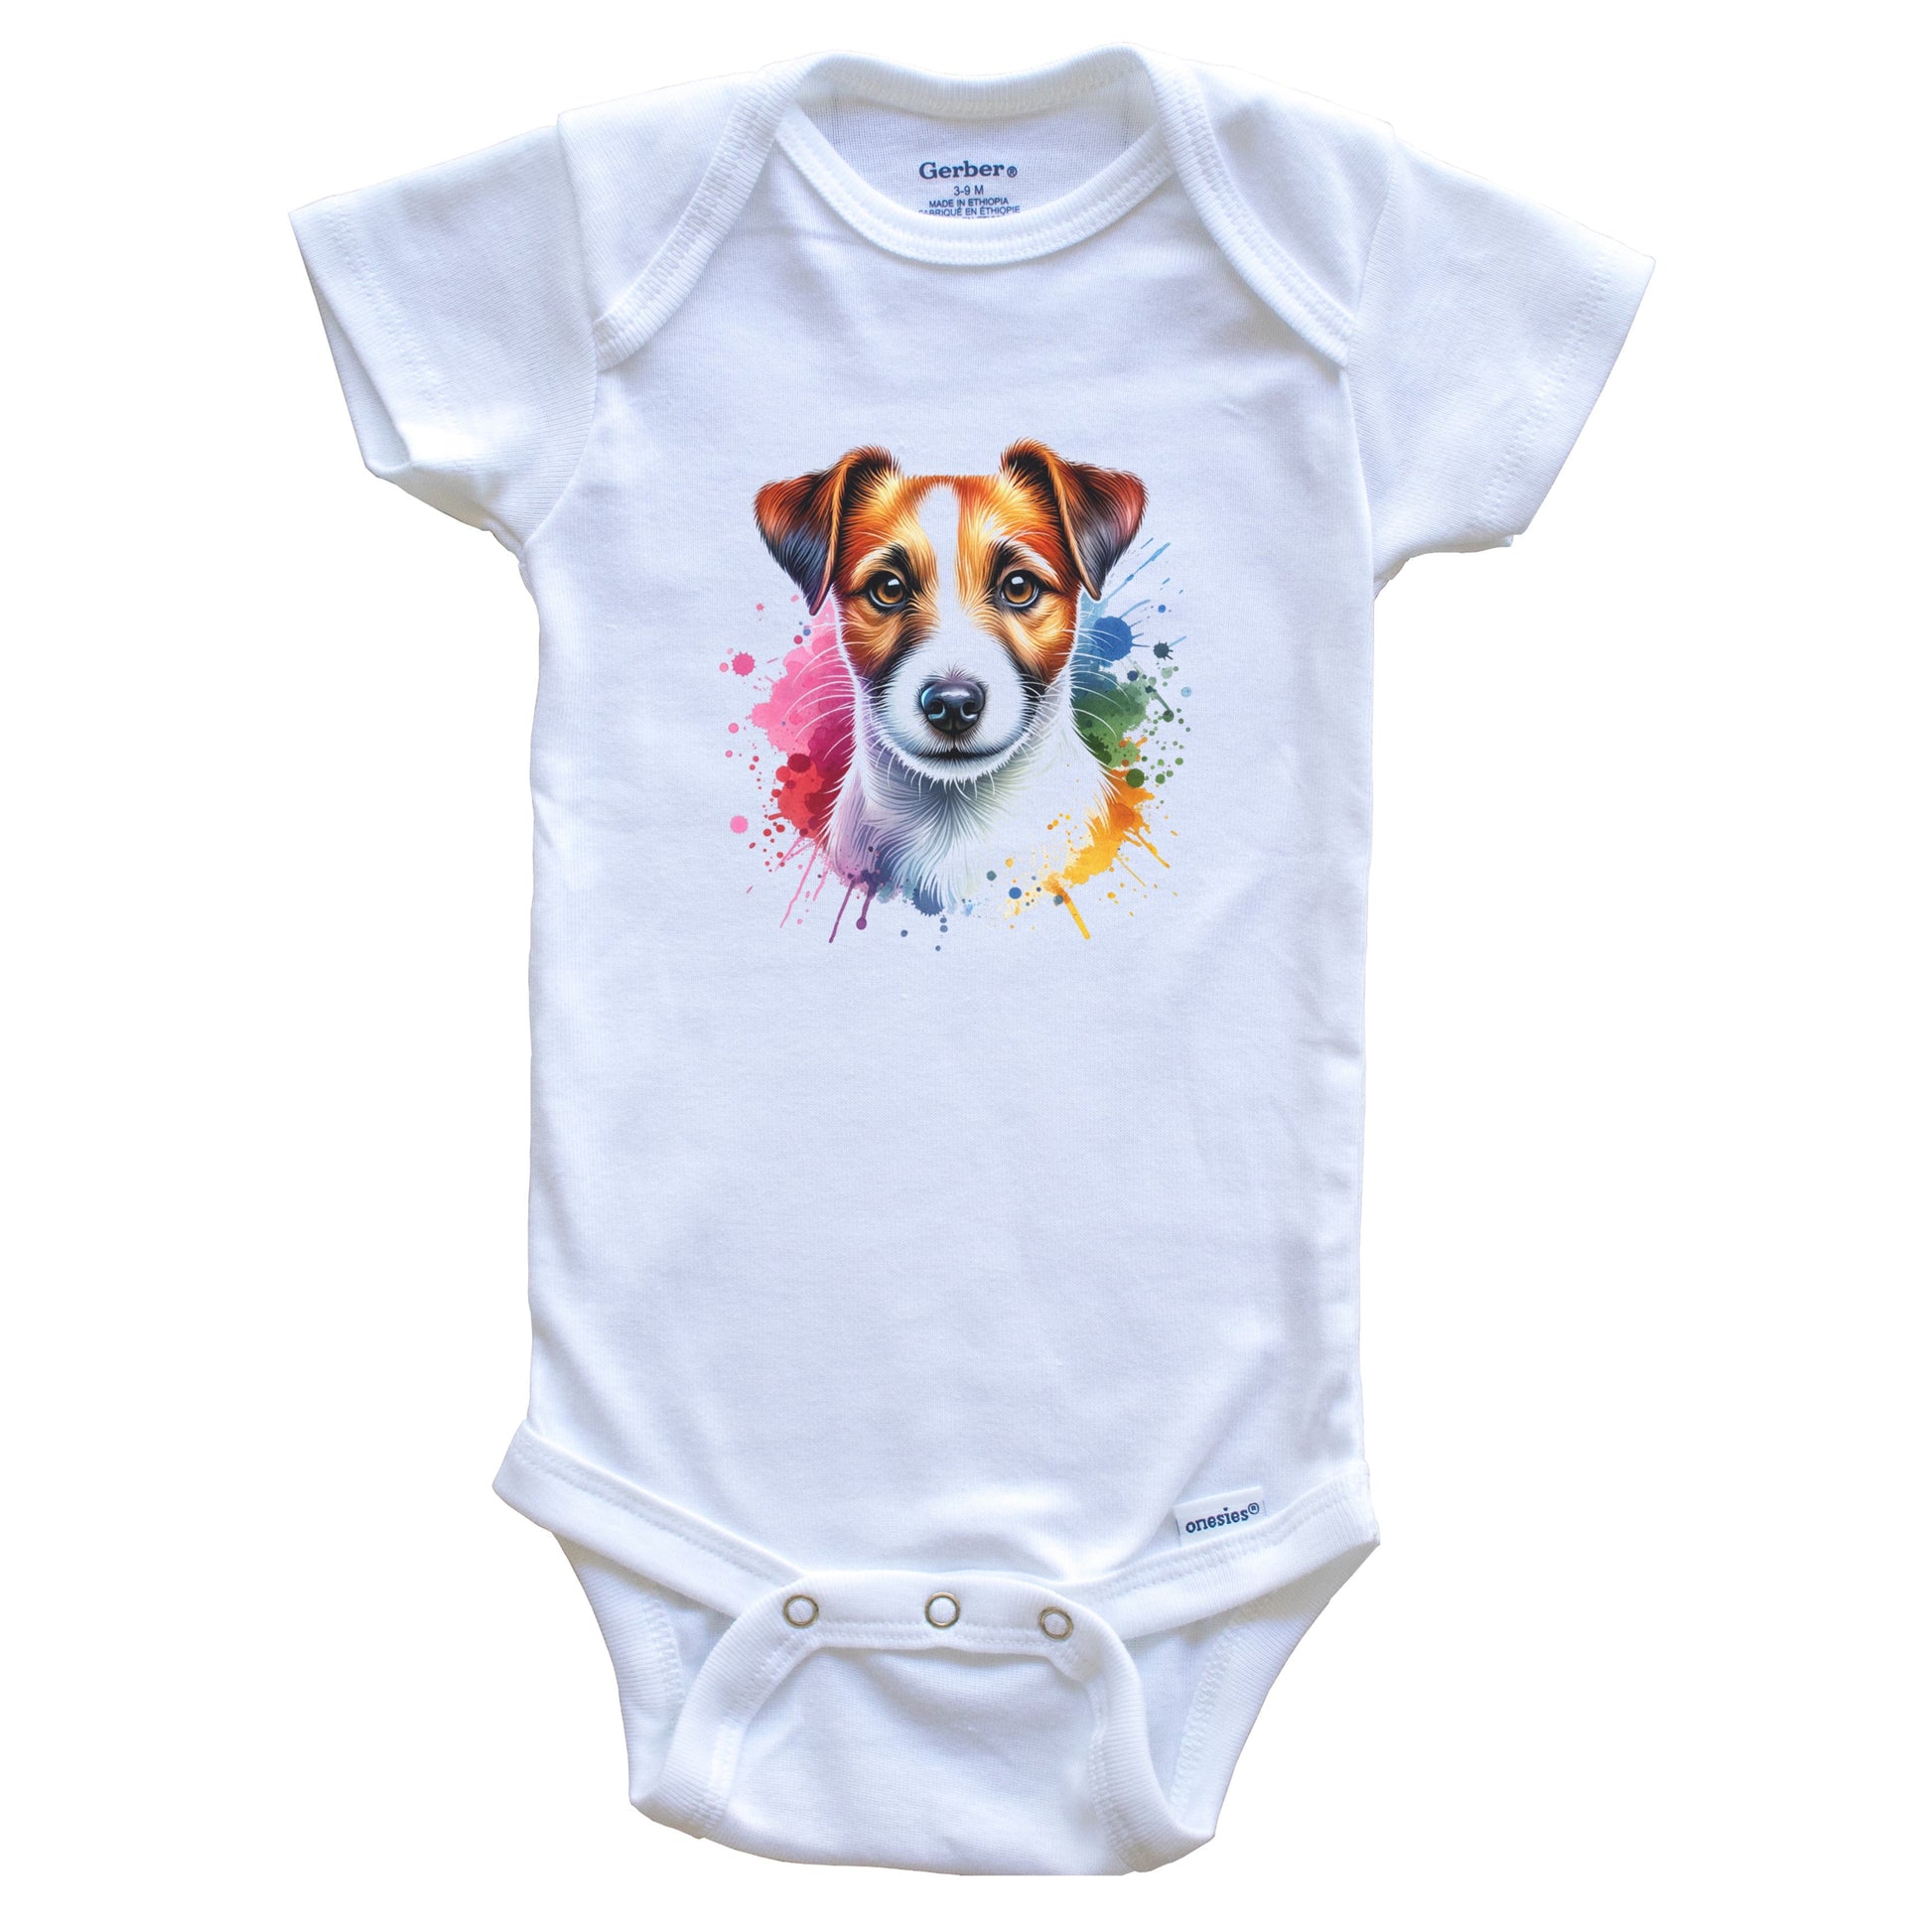 Jack Russell Terrier Rainbow Watercolor Portrait Dog Lover Baby Bodysuit - Jack Russell Baby Gift